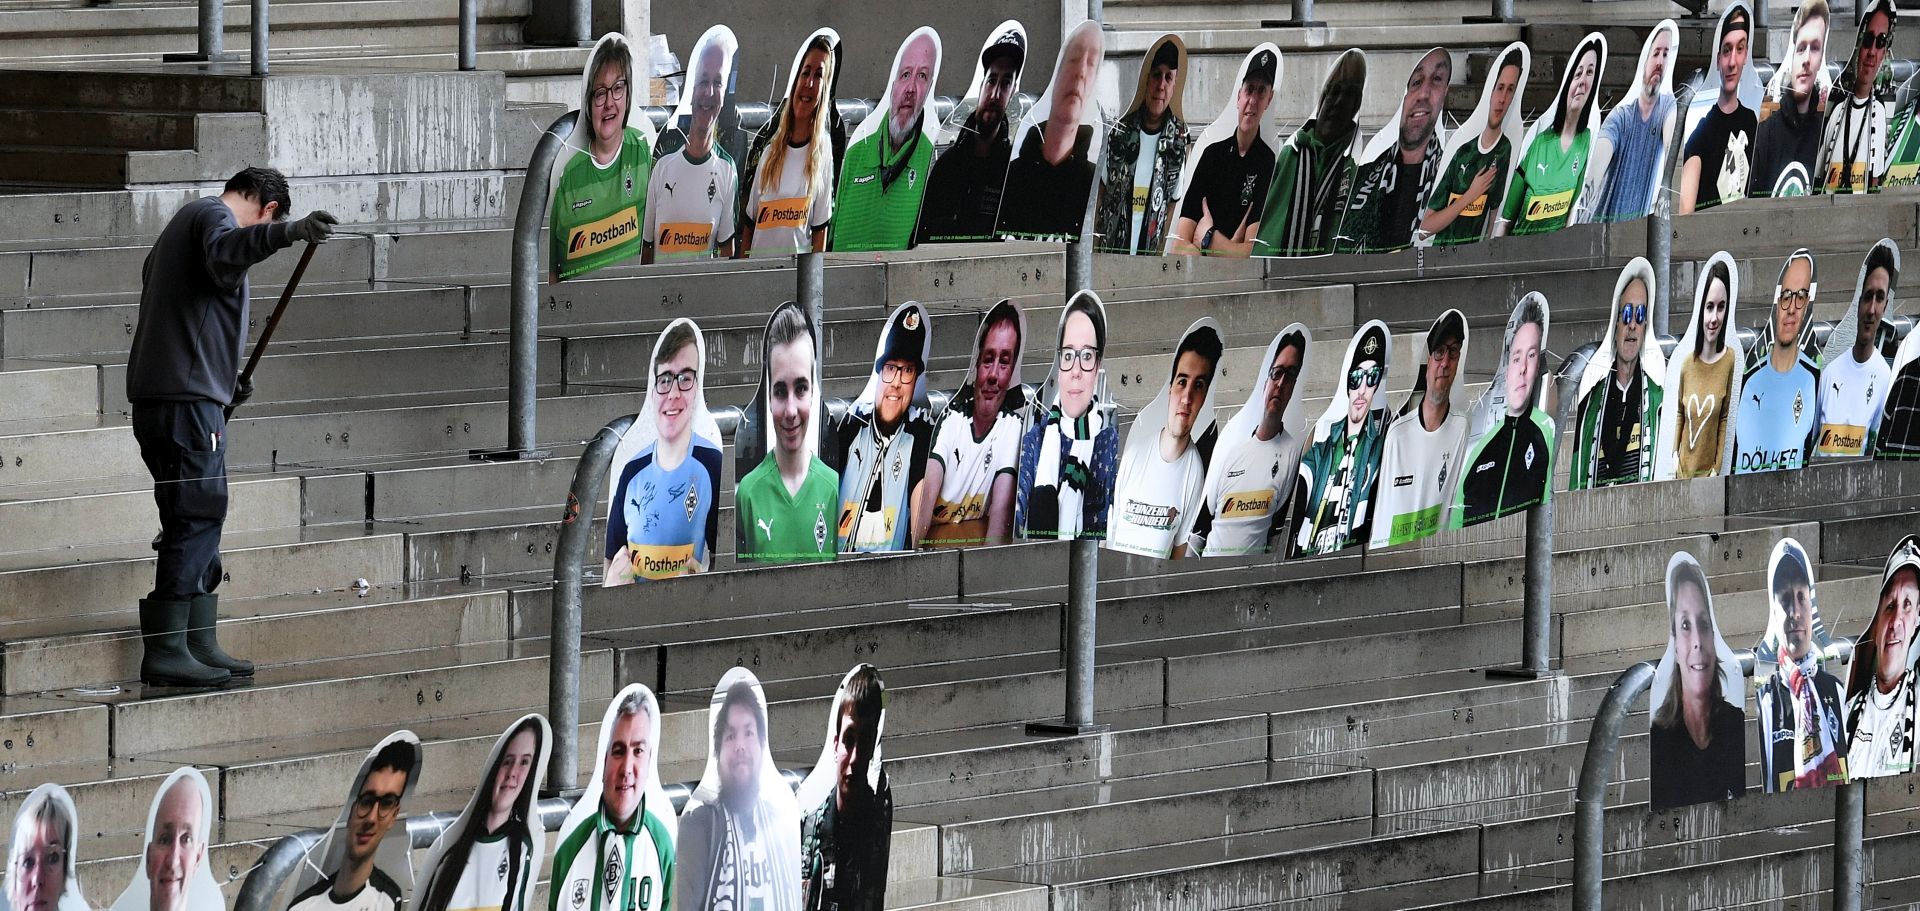 epa08365755 Cardboard cutouts showing supporters of German Bundesliga's football club Borussia Moenchengladbach are installed on the stands at Borussia Park stadium in Moenchengladbach, Germany, 16 April 2020. Supporters of Borussia Moenchengladbach wanted to contribute to a better atmosphere during 'ghost games' in the German Bundesliga. The German government and local authorities have heightened measures to stem the spread of COVID-19. The federal and state conference on the coronavirus crisis had confirmed that all upcoming major events would be suspended until 31 August 2020.  EPA/SASCHA STEINBACH